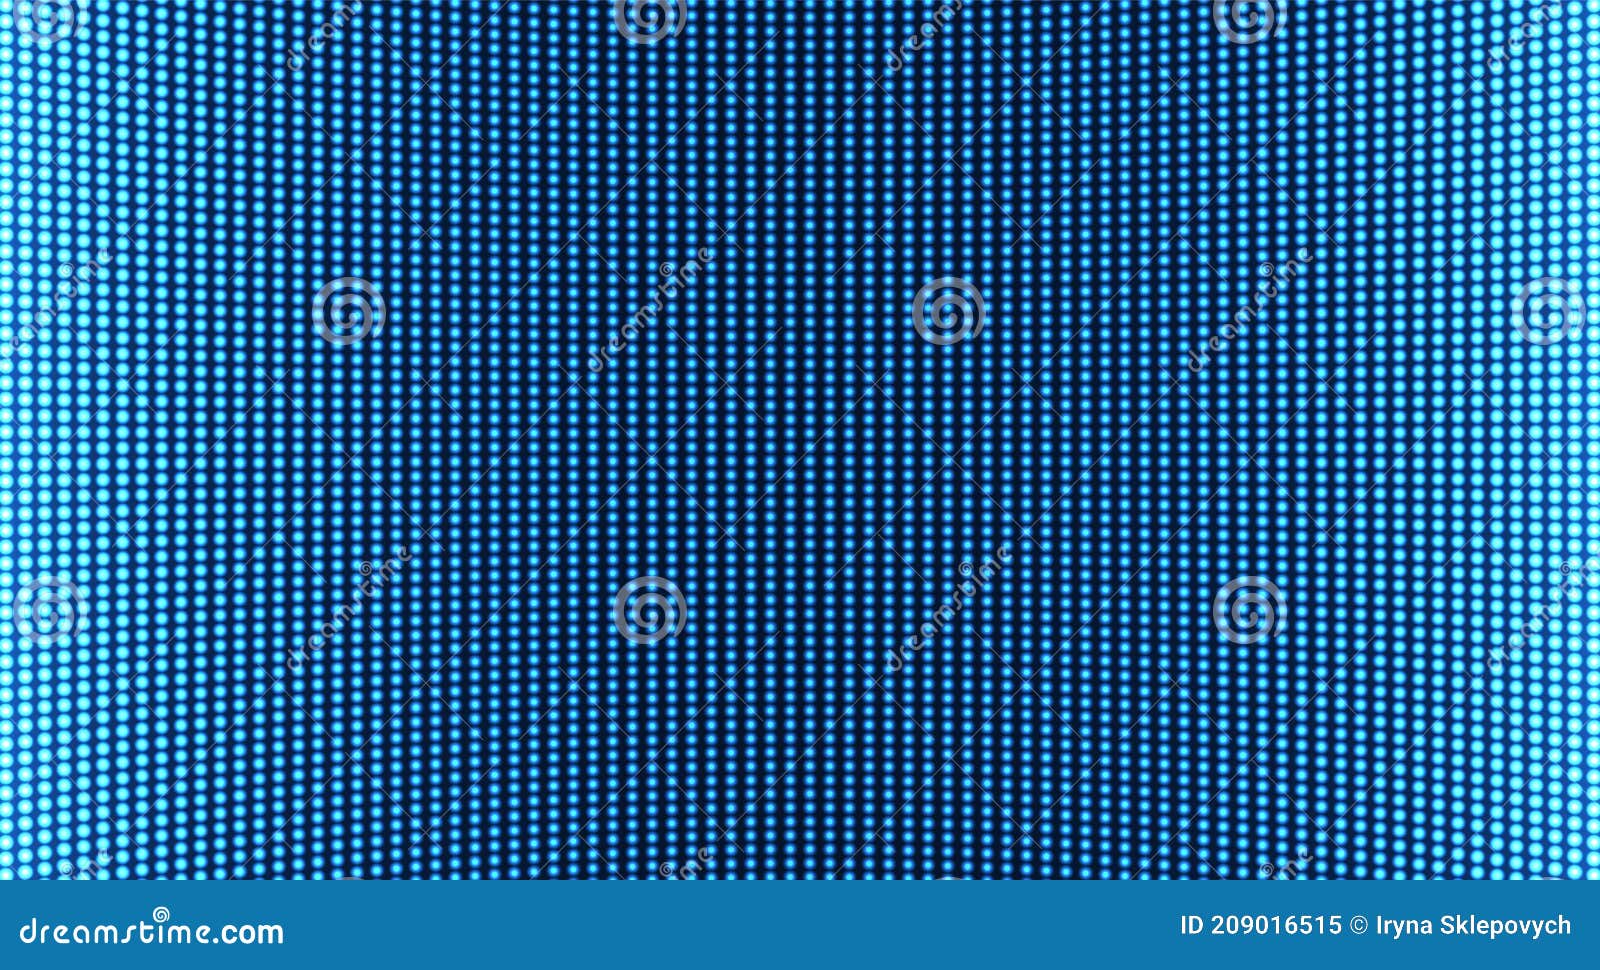 Led Screen Texture. Lcd Display with Dots. Digital Pixel Monitor. Vector  Illustration Stock Vector - Illustration of texture, wall: 209016515